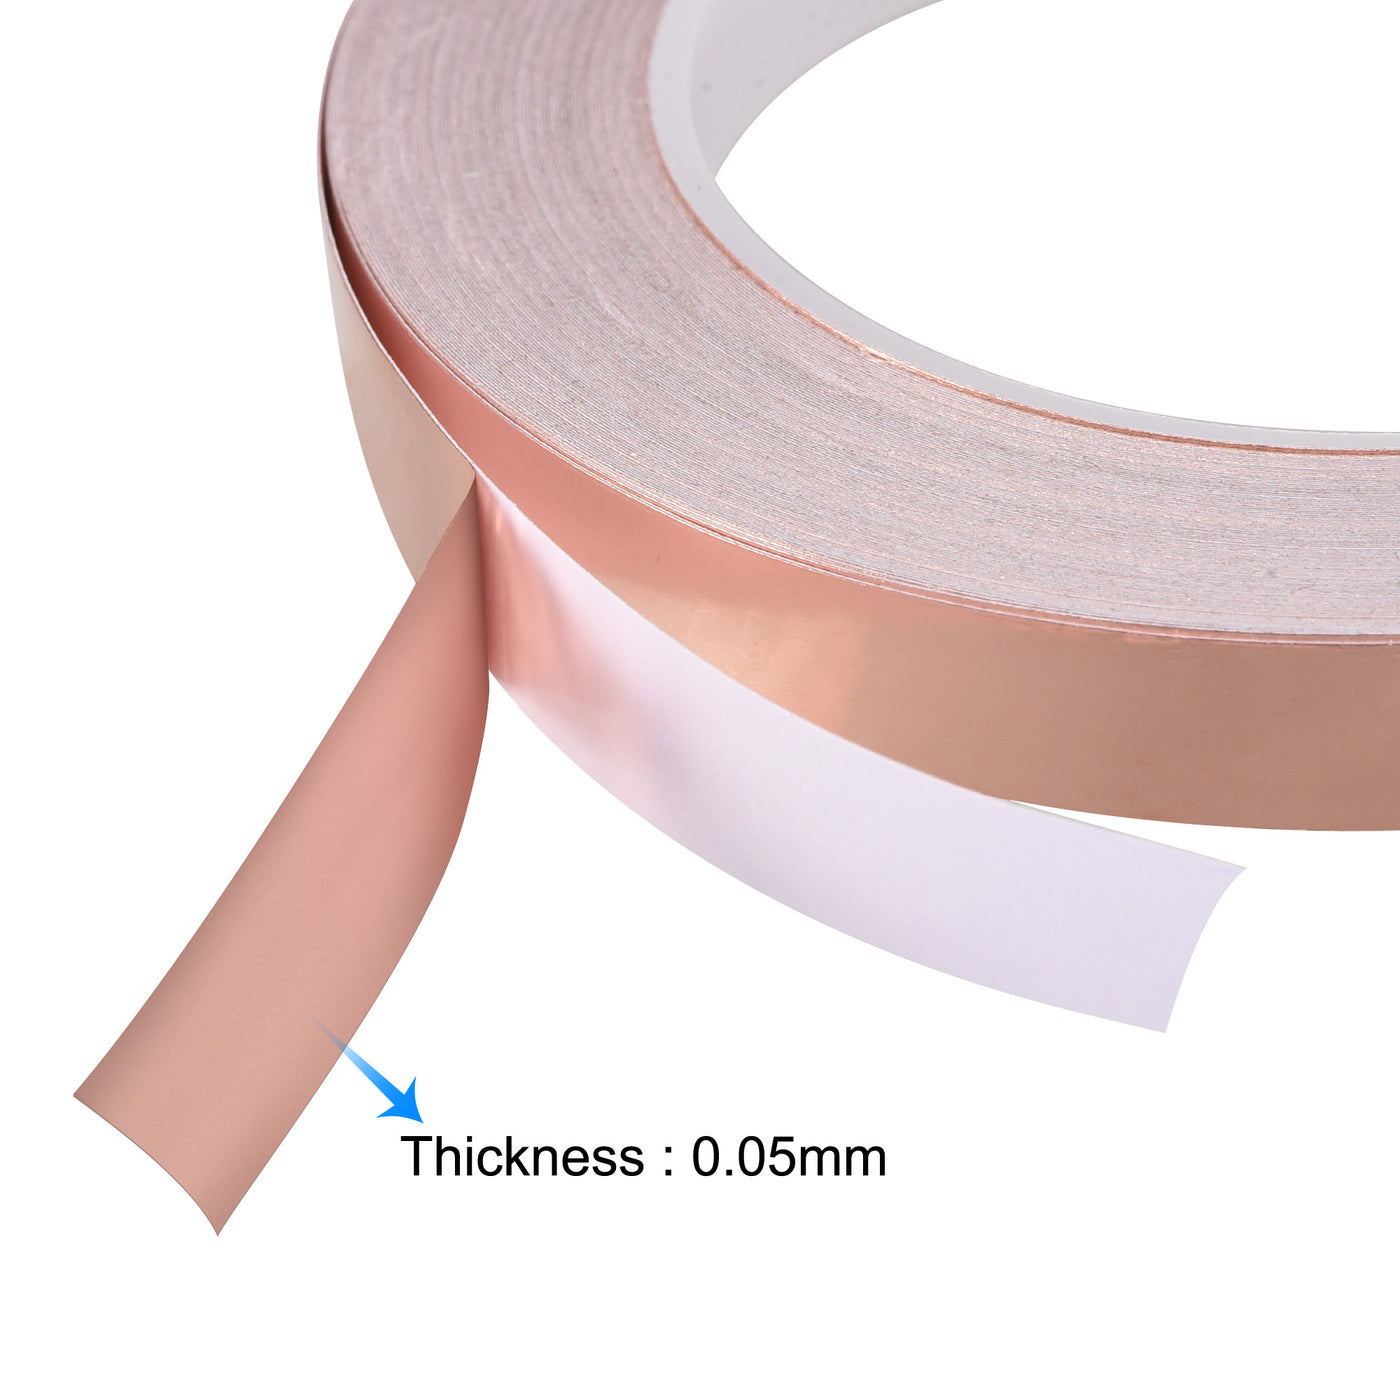 uxcell Uxcell Single-Sided Conductive Tape Copper Foil Tape 8mm x 30m/98.4ft 2pcs